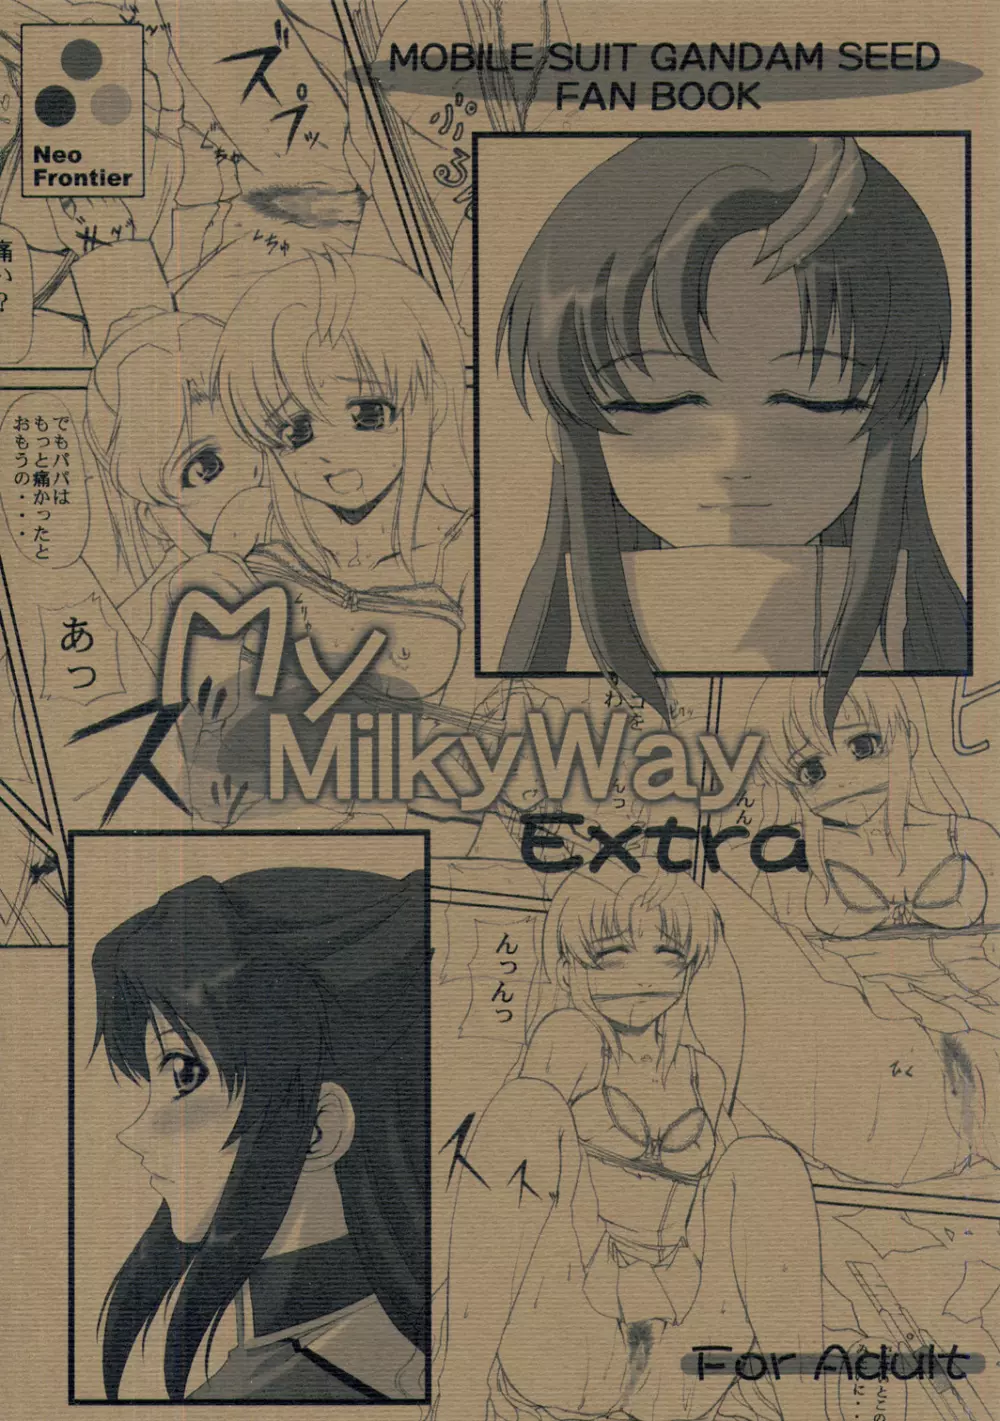 My Milky Way Extra - page1